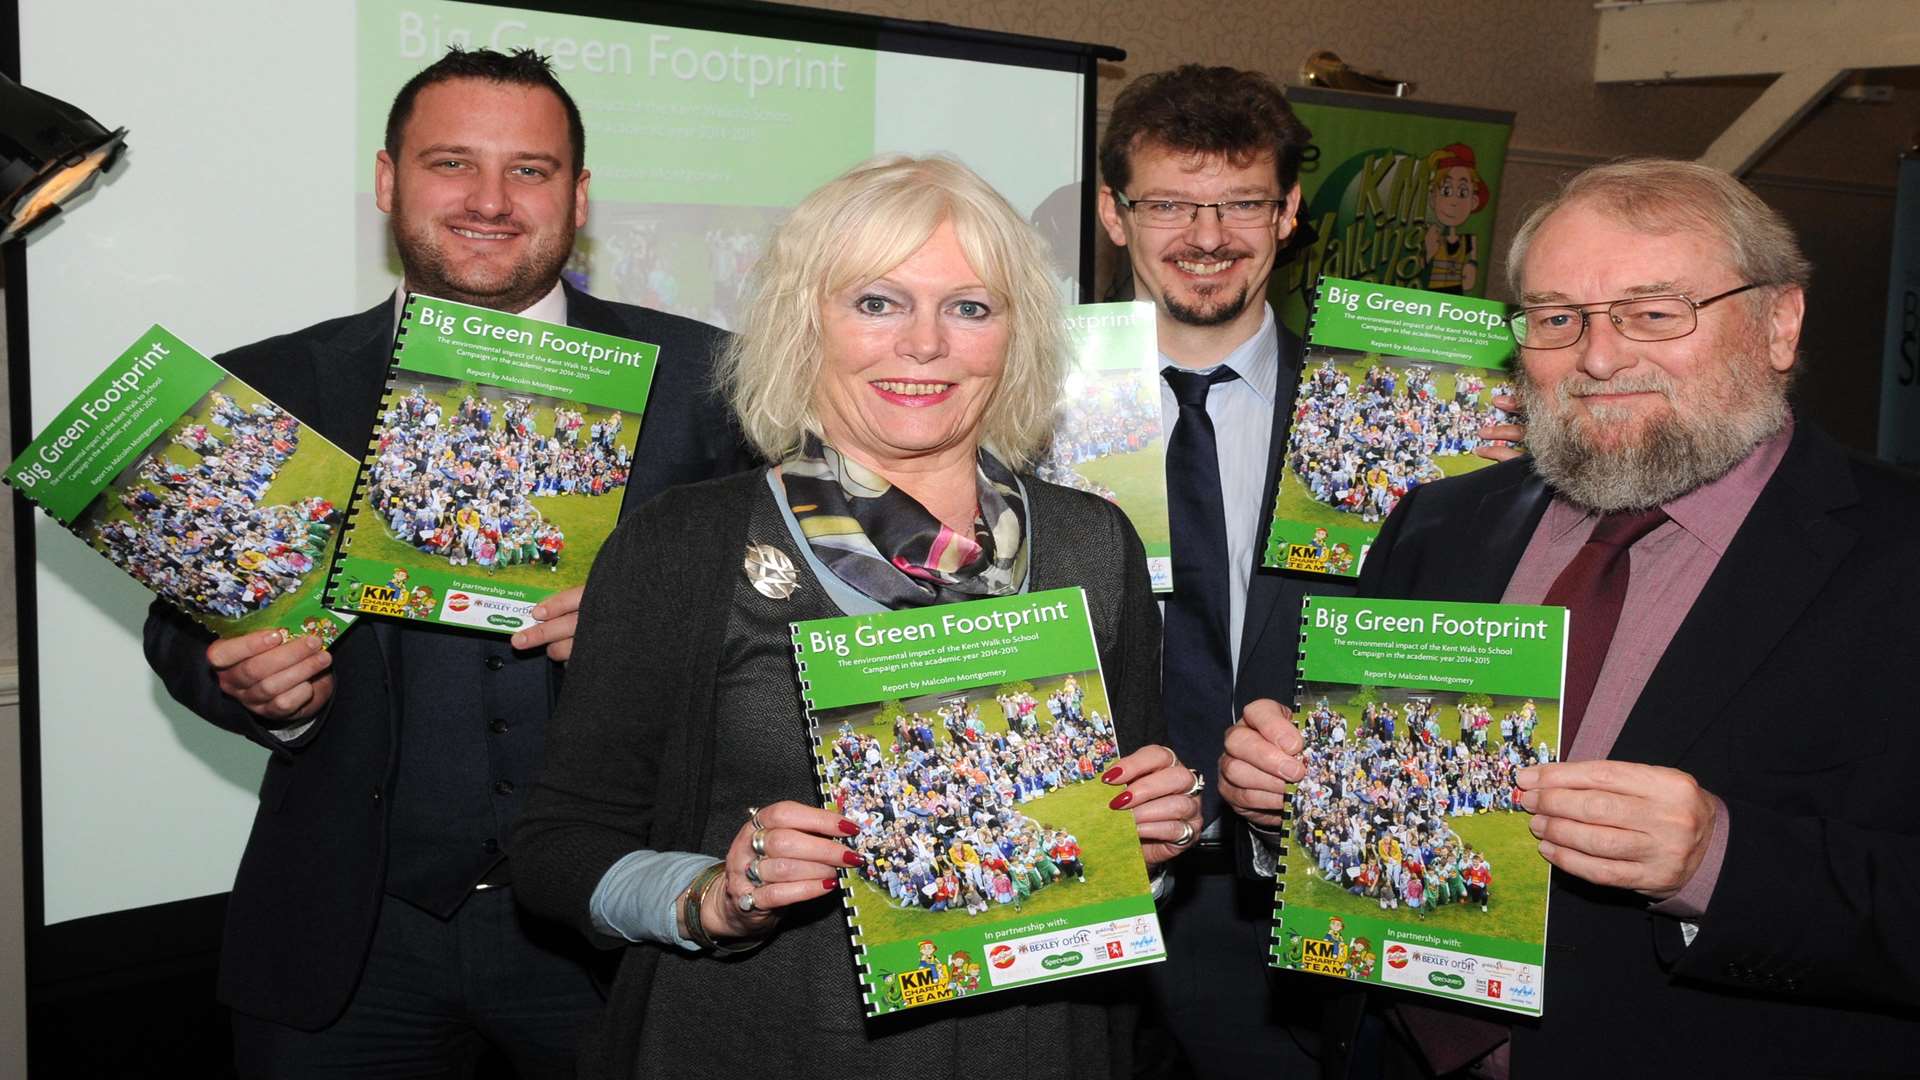 Matt Trusty of Specsavers, Craig Atkins of Orbit South and KM Charity Team trustees Gill Delahunty and Stuart Smith showcase the Big Green Footprint report at the KM Walk to School Awards presentation at Rowhill Grange, Wilmington